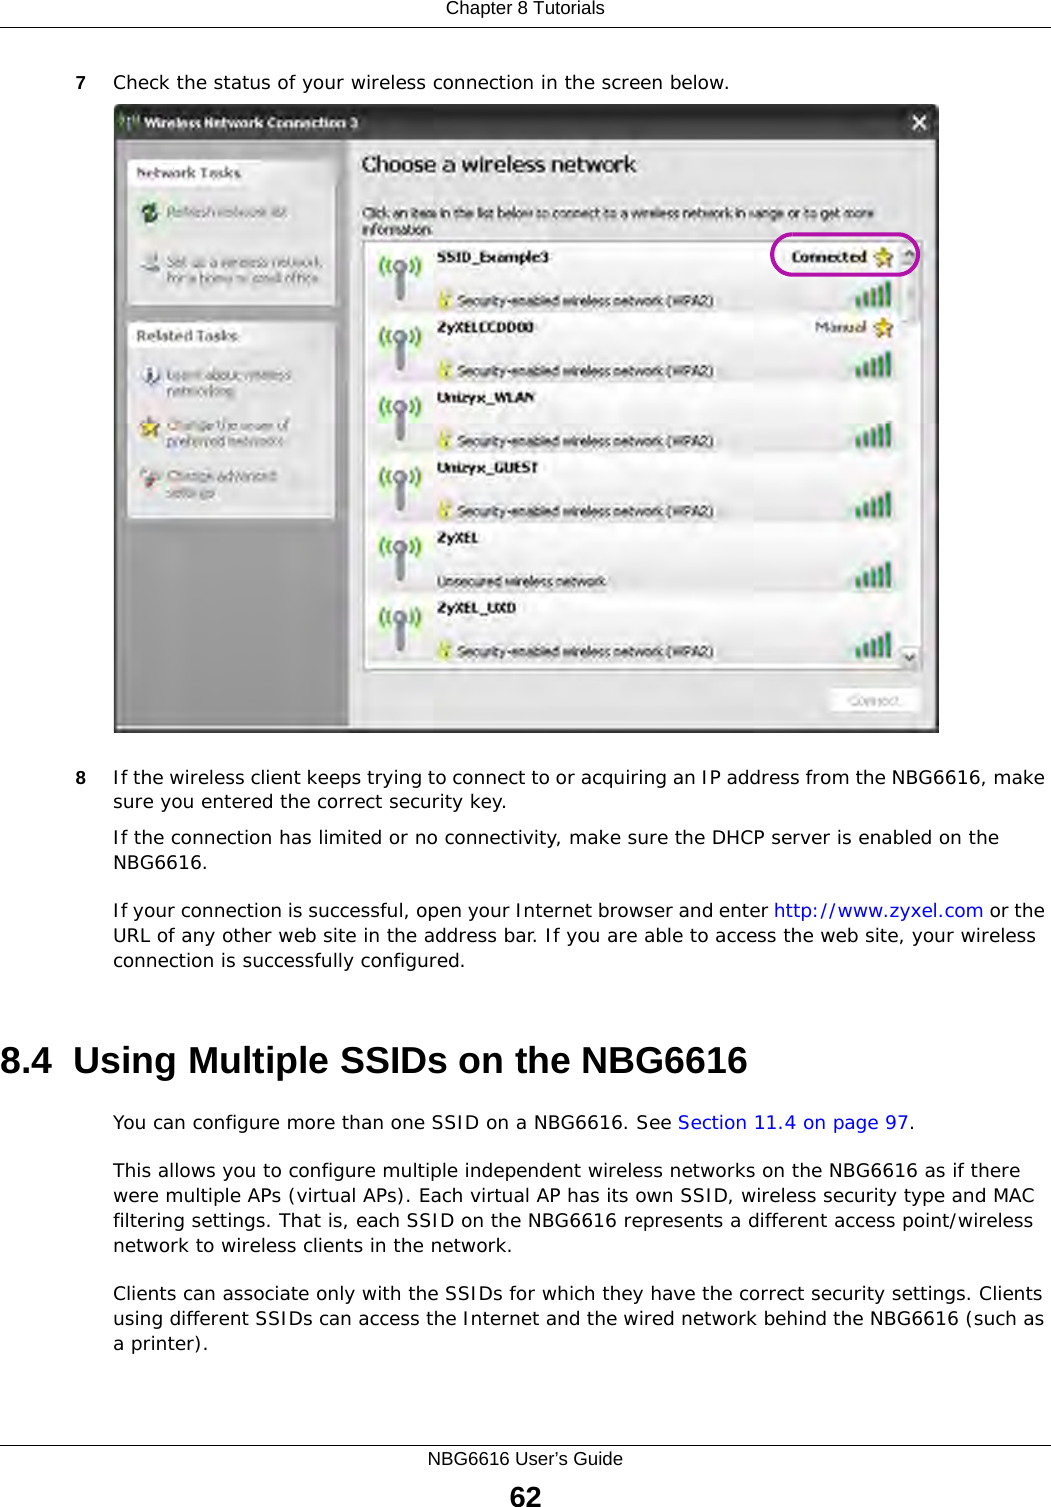 Chapter 8 TutorialsNBG6616 User’s Guide627Check the status of your wireless connection in the screen below.  8If the wireless client keeps trying to connect to or acquiring an IP address from the NBG6616, make sure you entered the correct security key.If the connection has limited or no connectivity, make sure the DHCP server is enabled on the NBG6616.If your connection is successful, open your Internet browser and enter http://www.zyxel.com or the URL of any other web site in the address bar. If you are able to access the web site, your wireless connection is successfully configured.8.4  Using Multiple SSIDs on the NBG6616You can configure more than one SSID on a NBG6616. See Section 11.4 on page 97. This allows you to configure multiple independent wireless networks on the NBG6616 as if there were multiple APs (virtual APs). Each virtual AP has its own SSID, wireless security type and MAC filtering settings. That is, each SSID on the NBG6616 represents a different access point/wireless network to wireless clients in the network. Clients can associate only with the SSIDs for which they have the correct security settings. Clients using different SSIDs can access the Internet and the wired network behind the NBG6616 (such as a printer). 